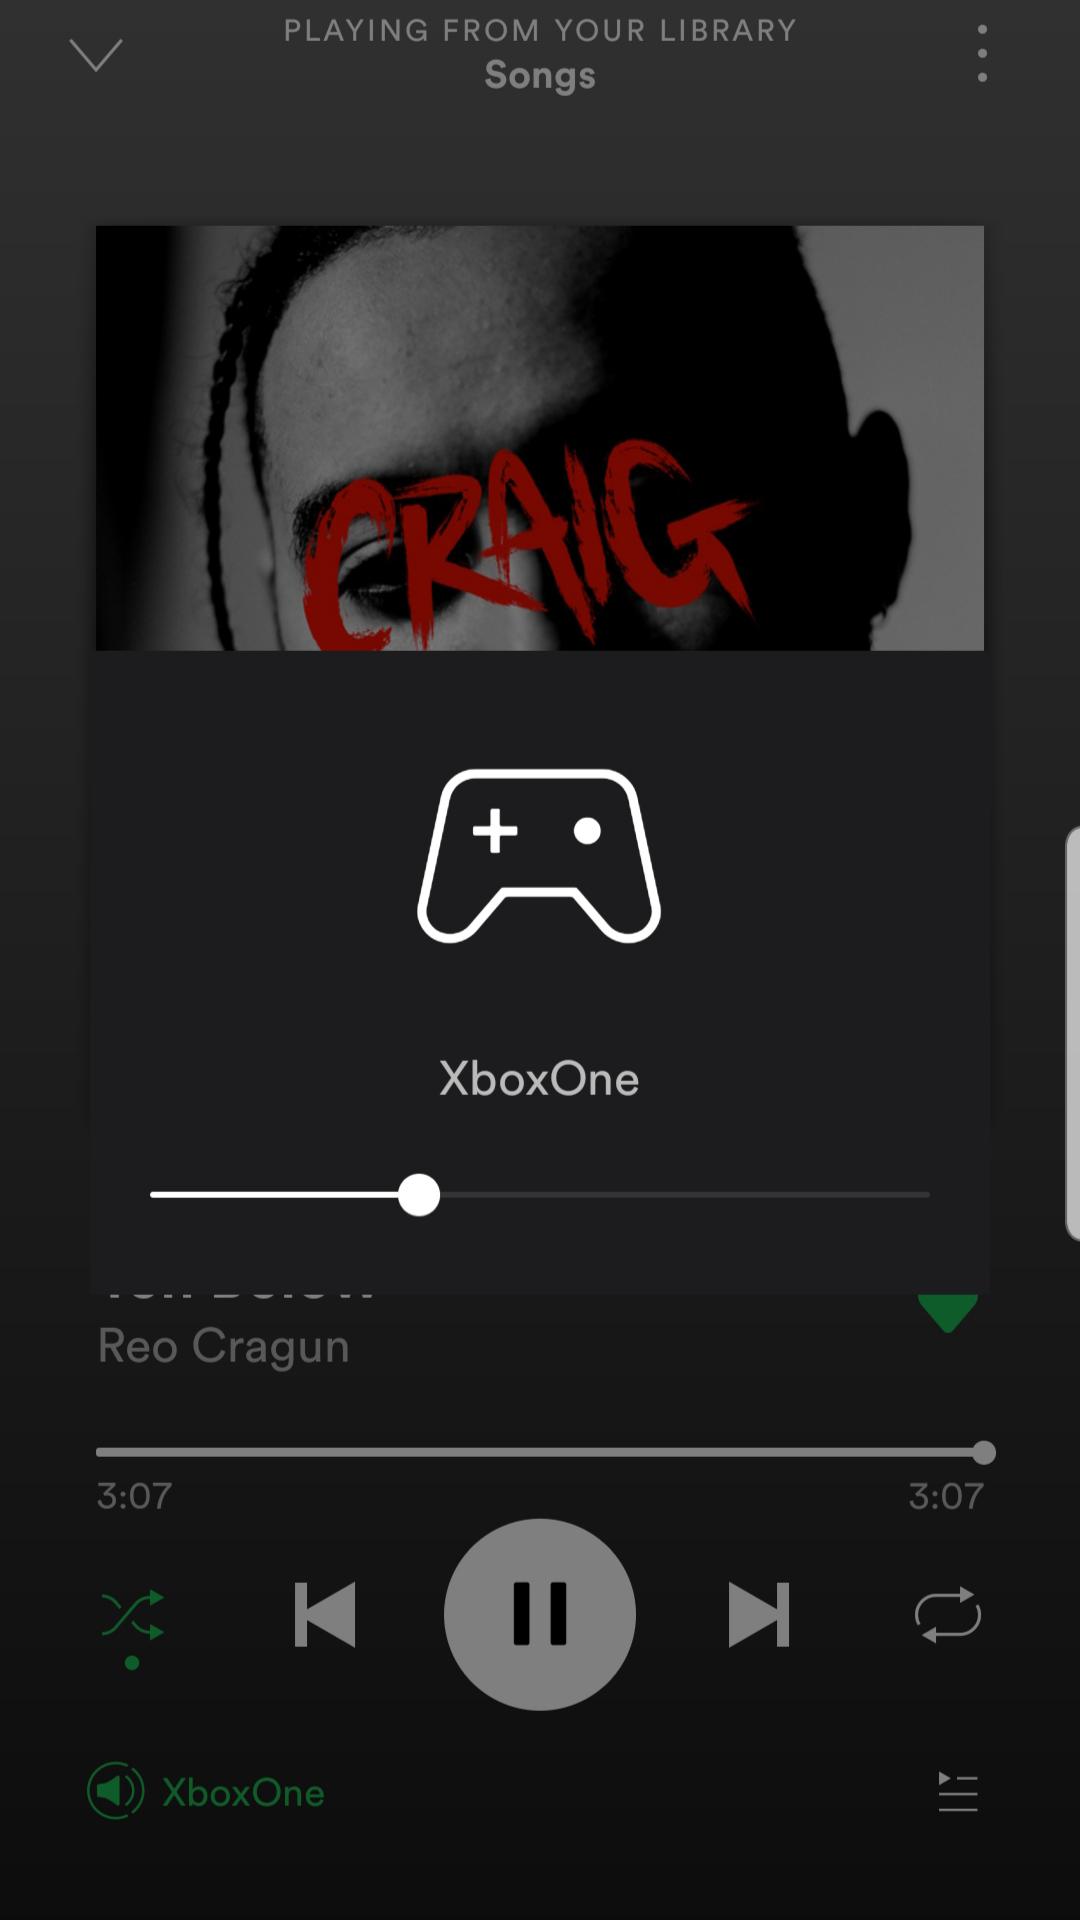 Tip Background Music Too Loud Even On Spotify Xbox S Lowest